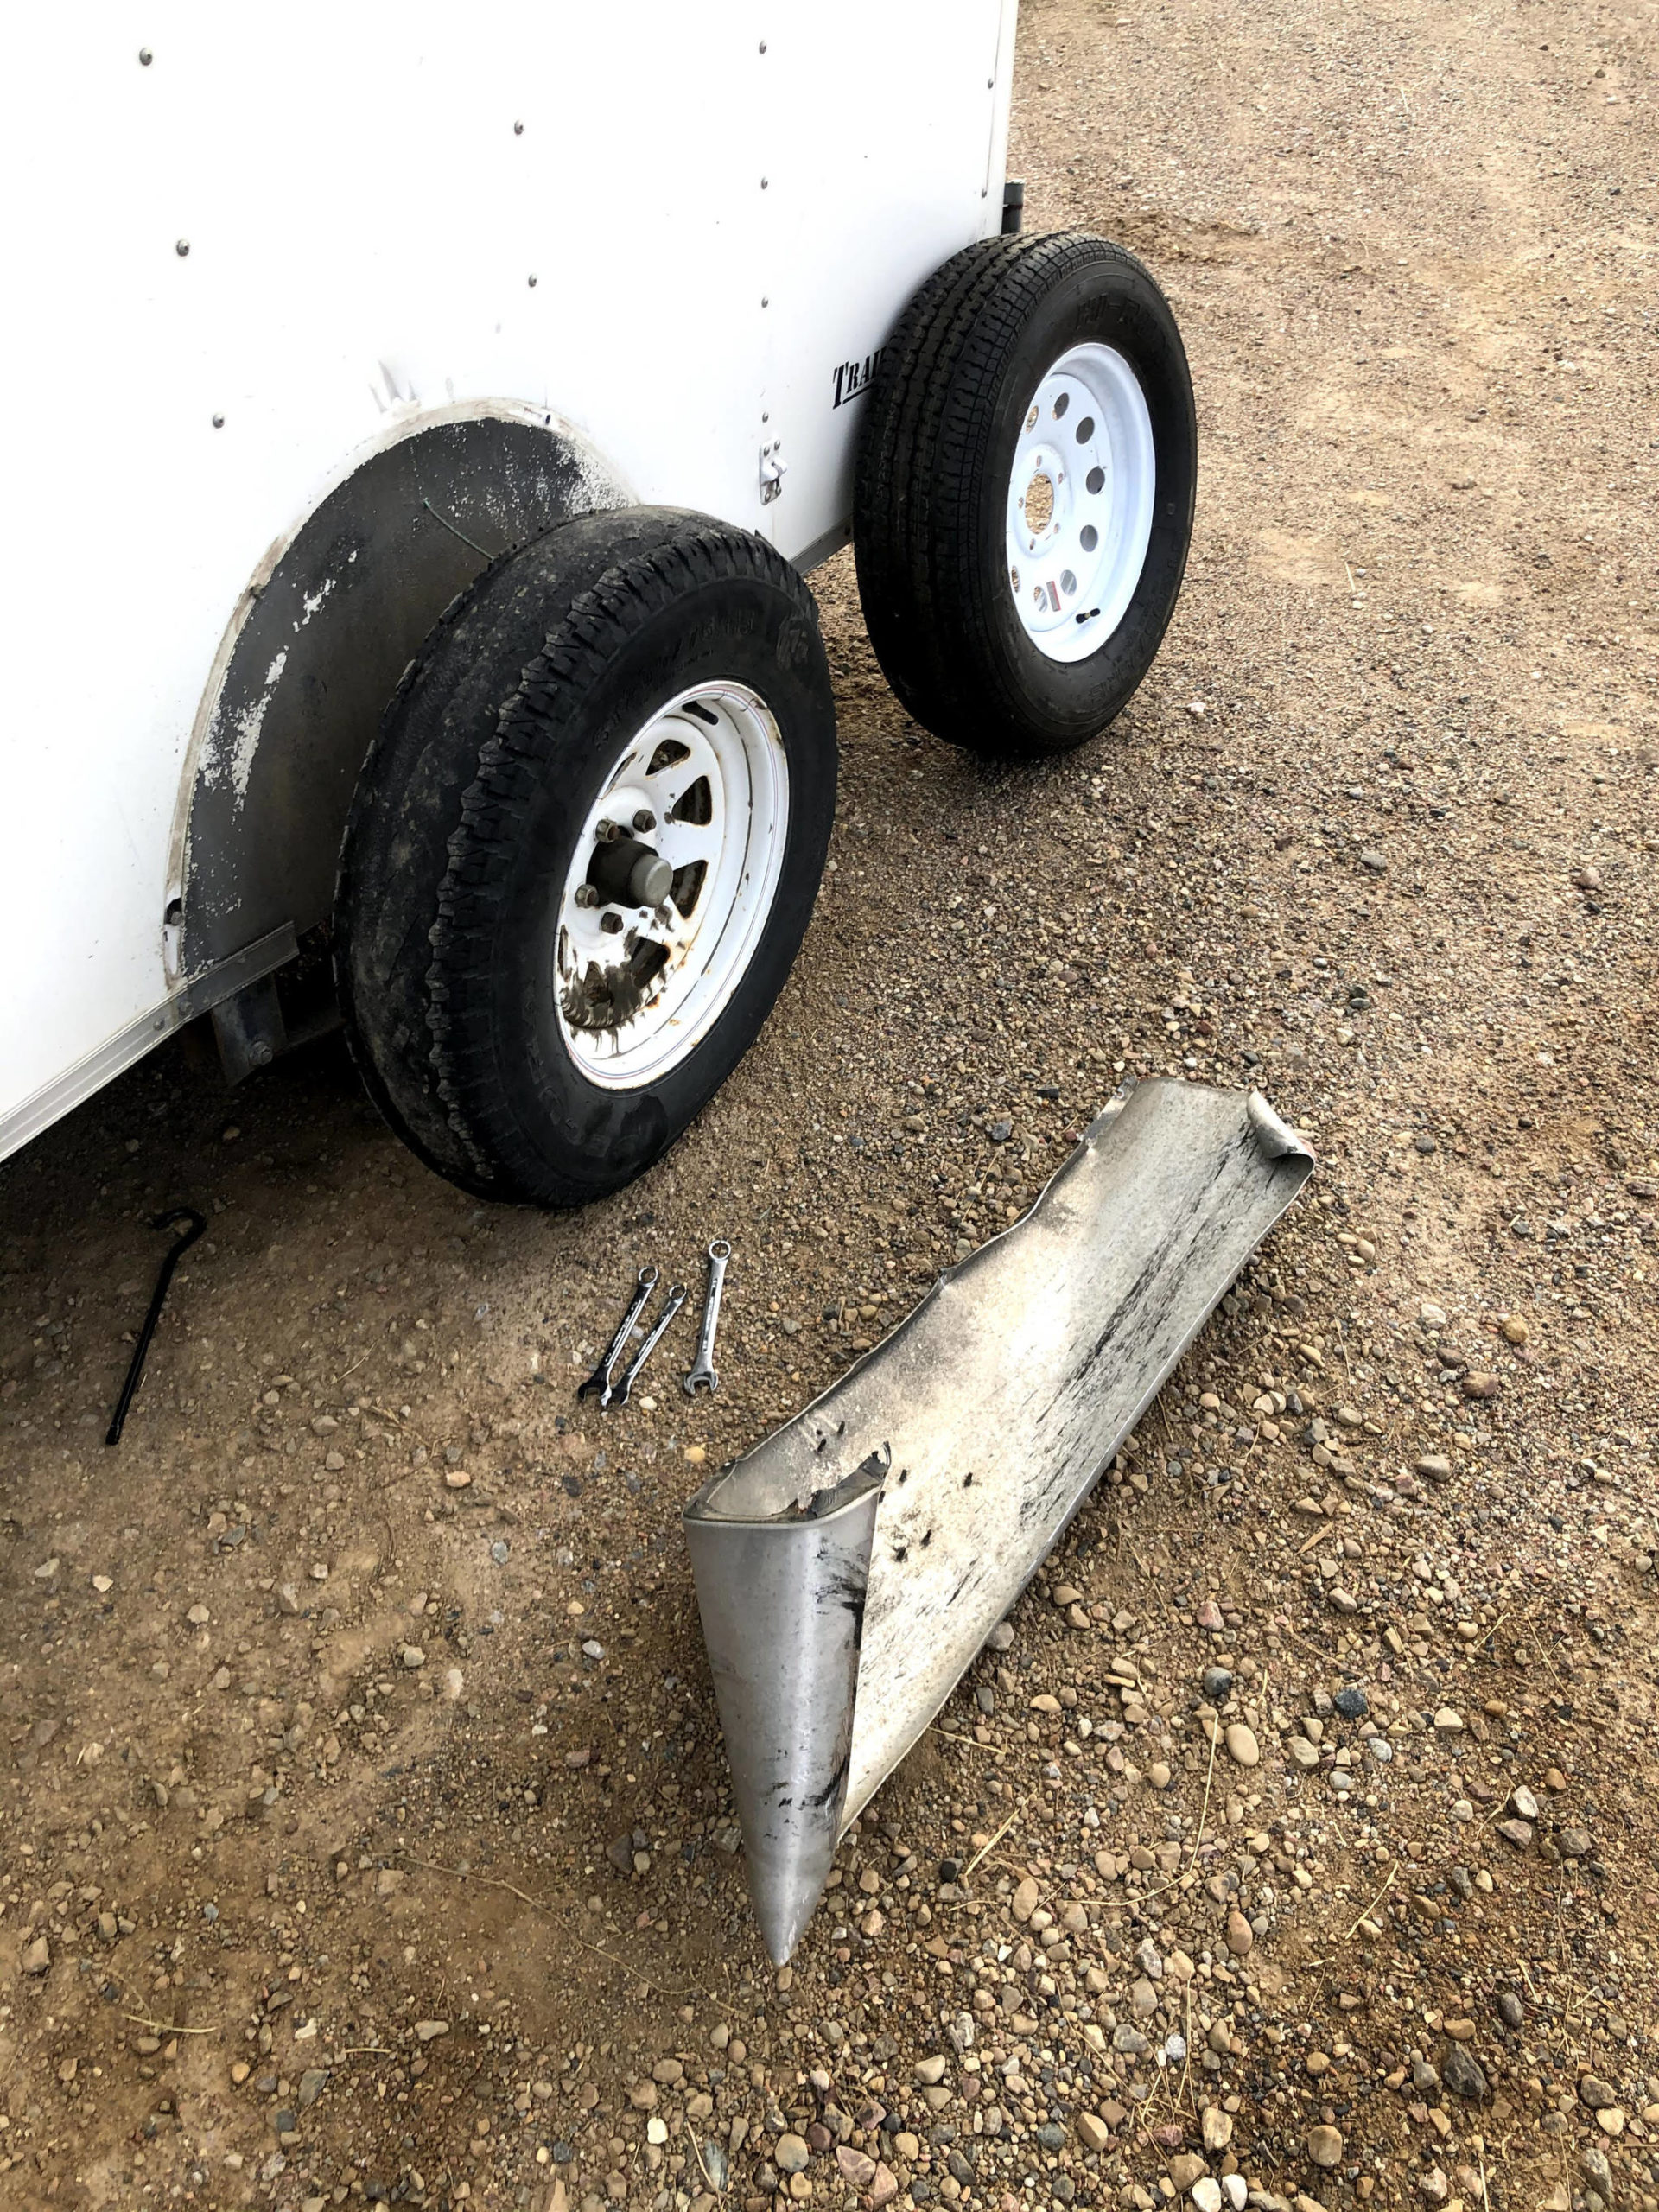 A trailer tire, after the tread and fender ripped off along the Alaska Highway, on July 15, 2020. (Photo by Camille Botello/Peninsula Clarion)